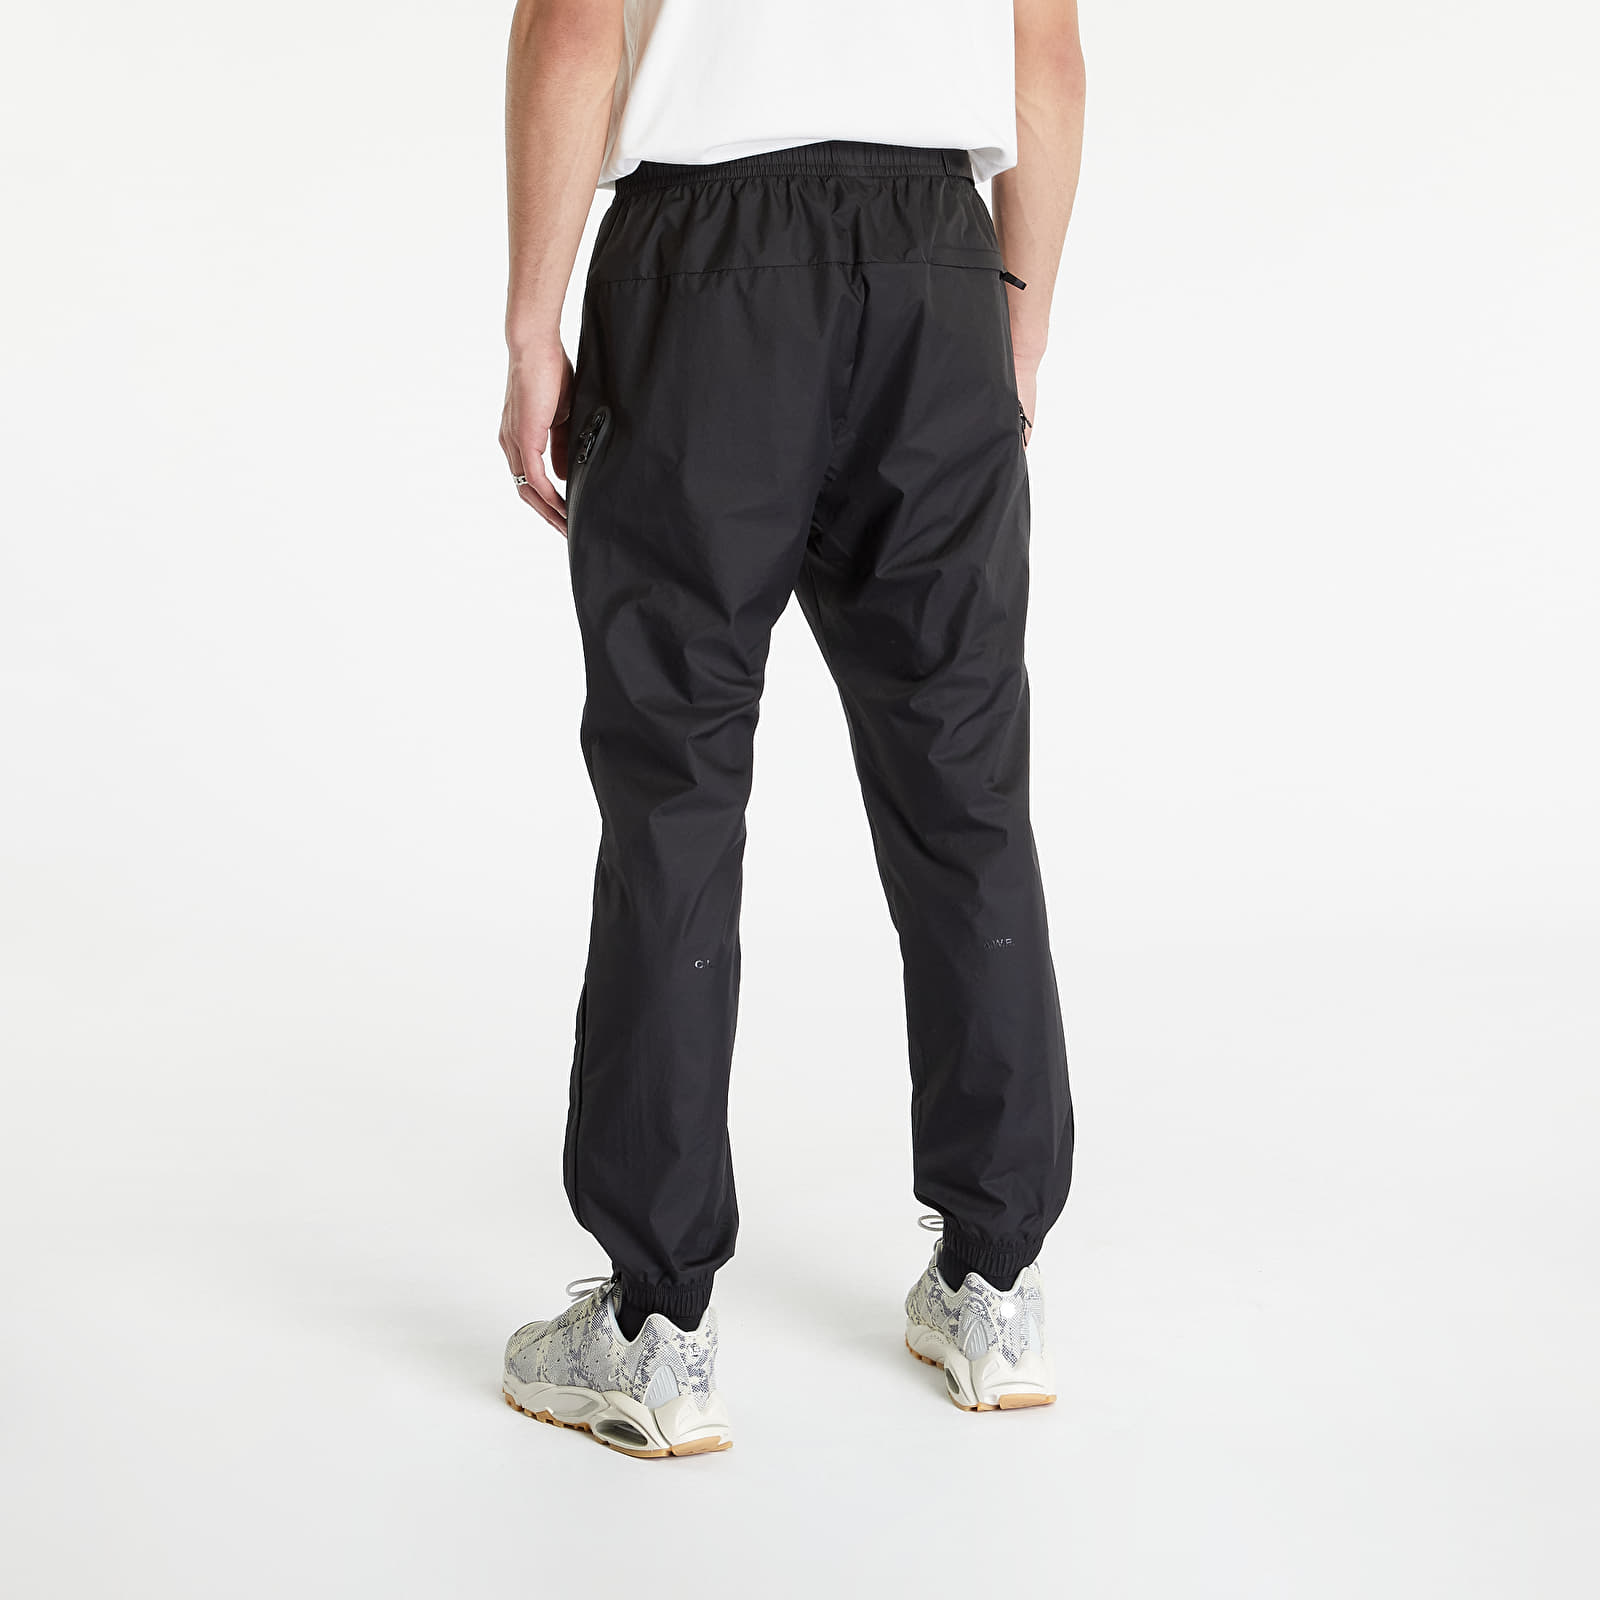 Nylon Pants for Young Adult Men | Nordstrom